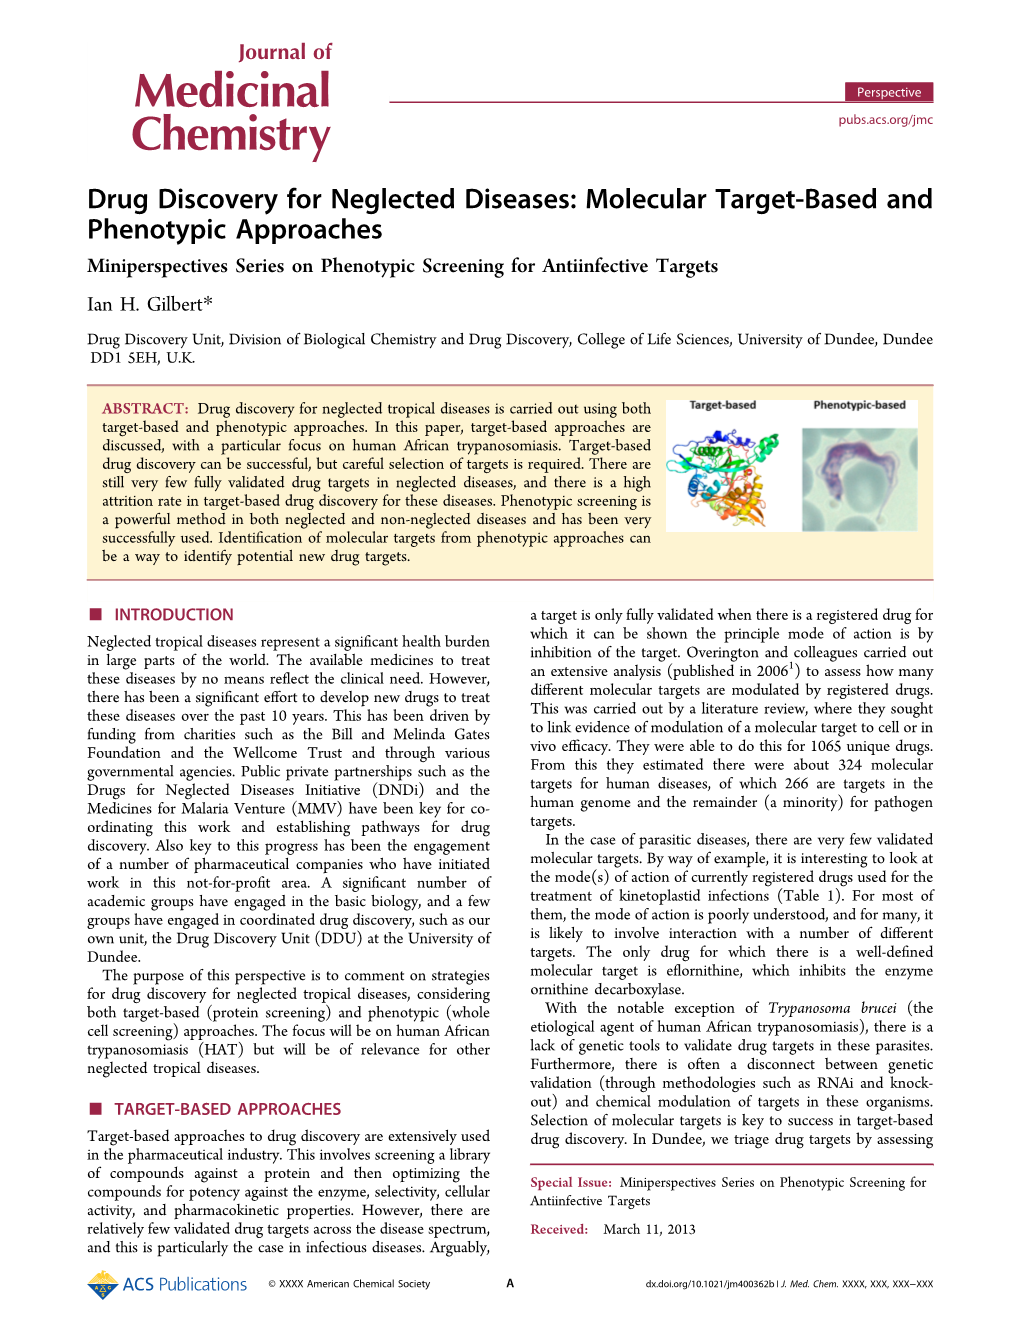 Drug Discovery for Neglected Diseases: Molecular Target-Based